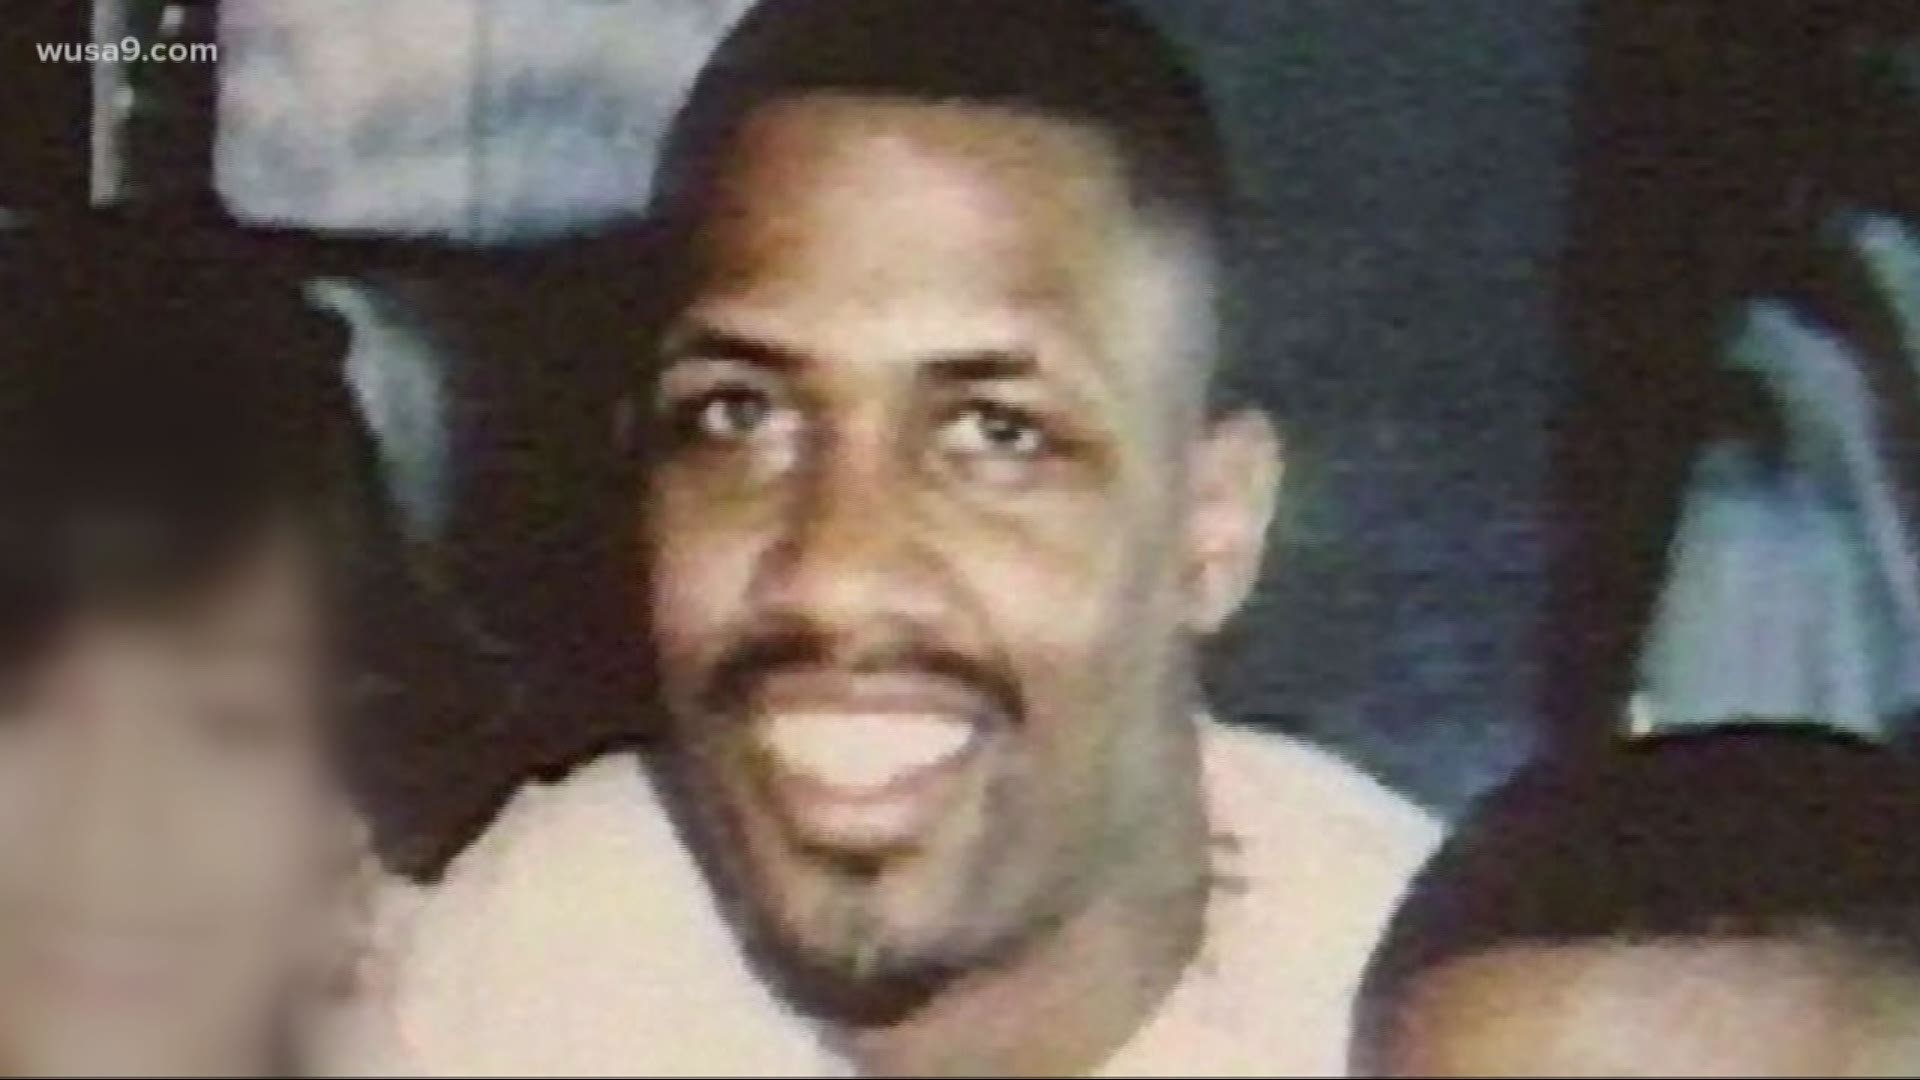 Former DC drug kingpin, Rayful Edmond, could receive early release from